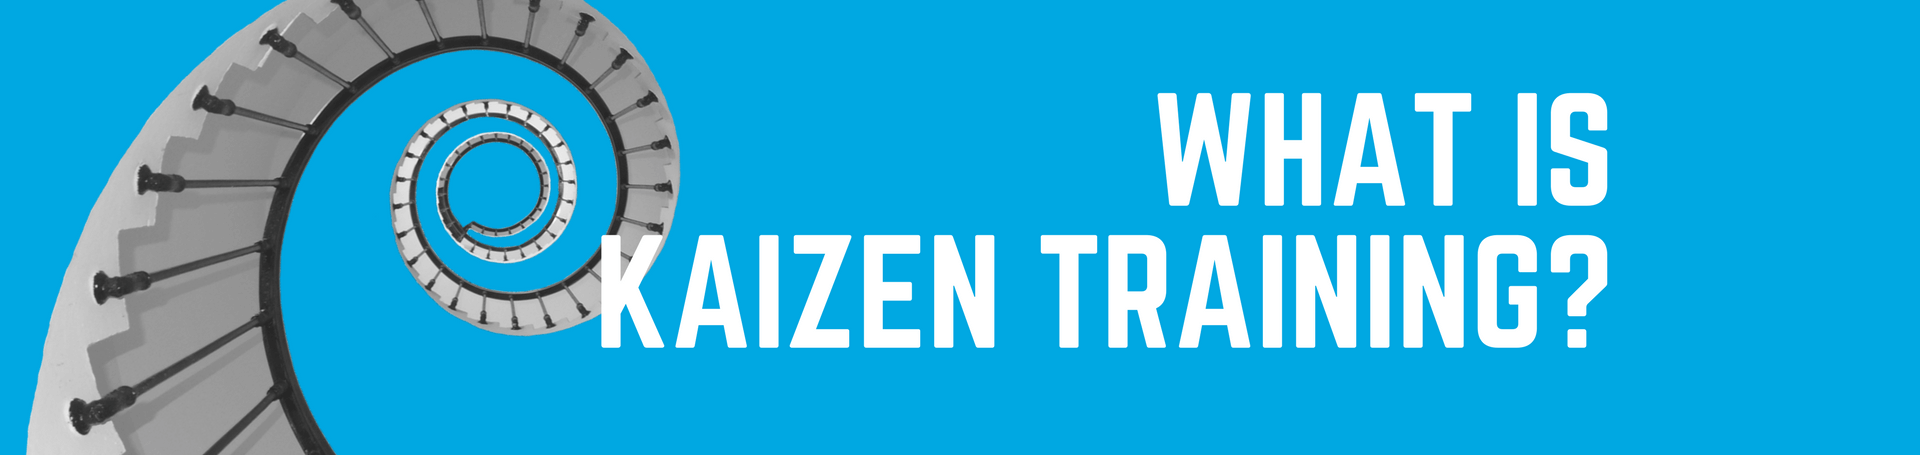 What is Kaizen training?